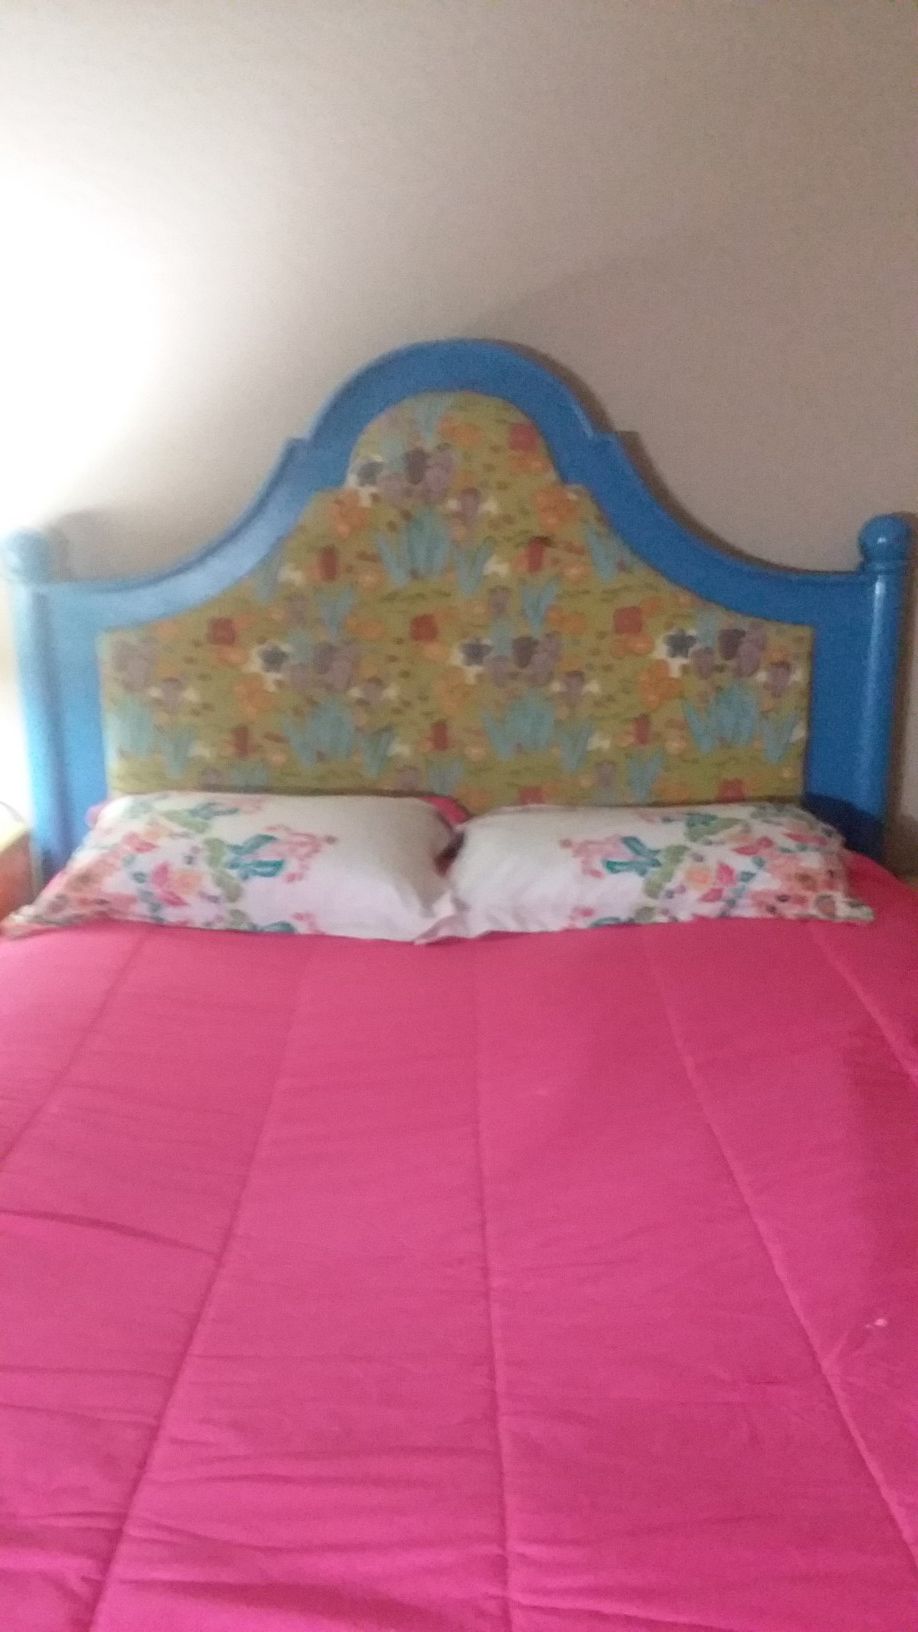 Cute queen bedroom set from Potato Barn (Cash only)